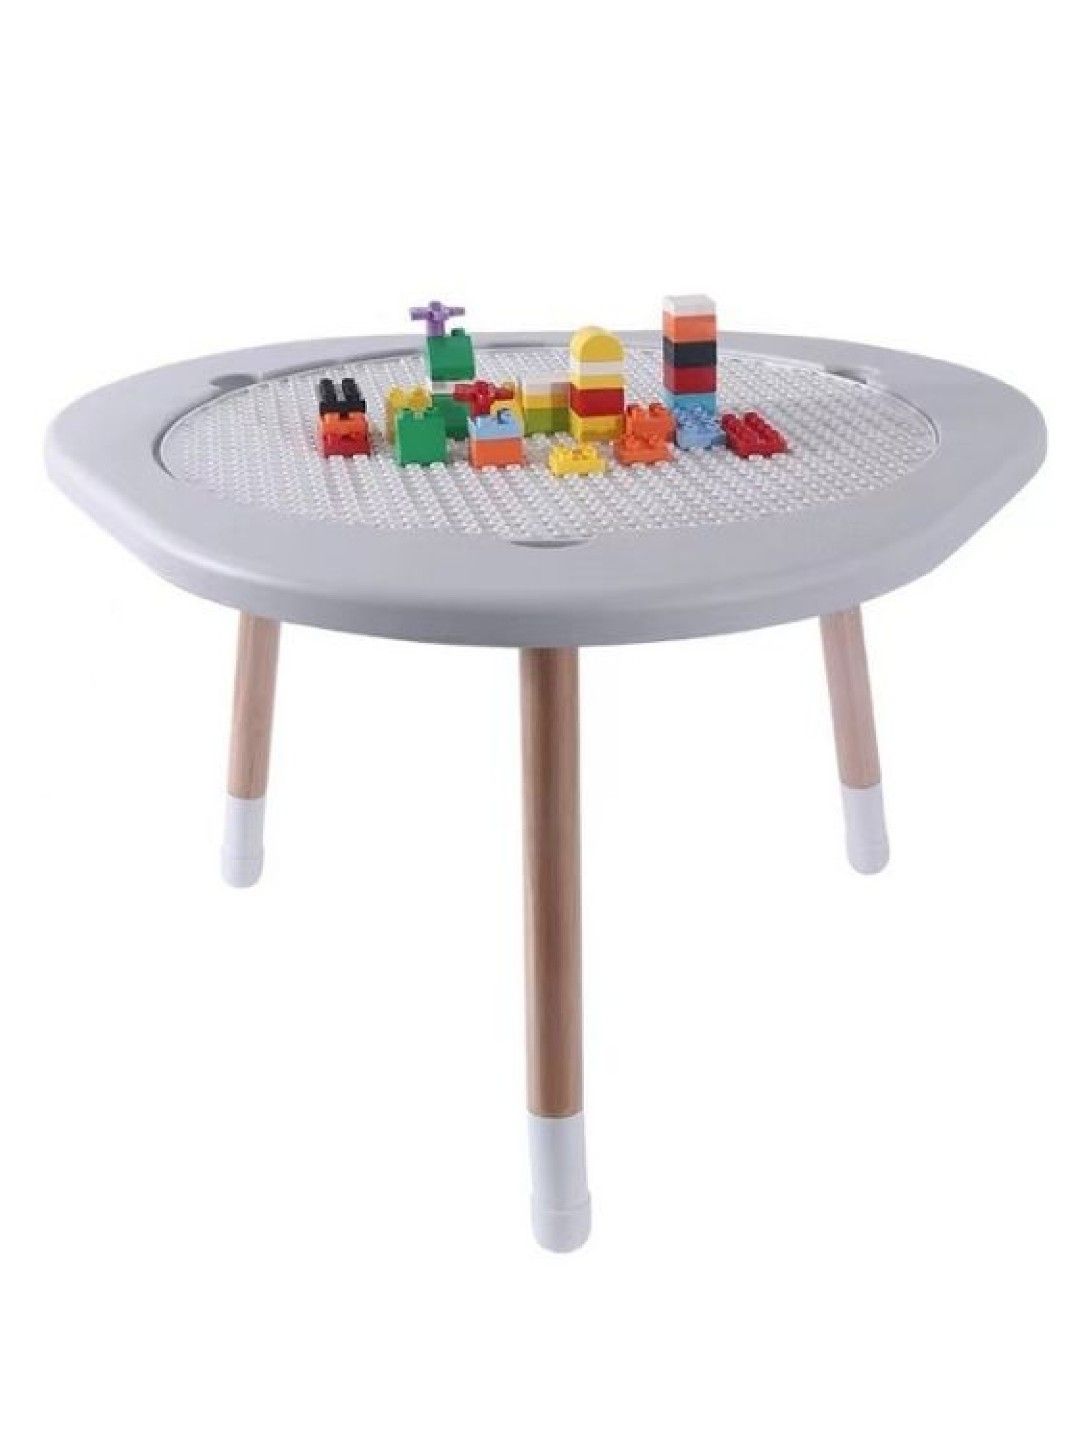 Discover Living Ph Kids Multi-purpose 3 in 1 Wooden Furniture Table